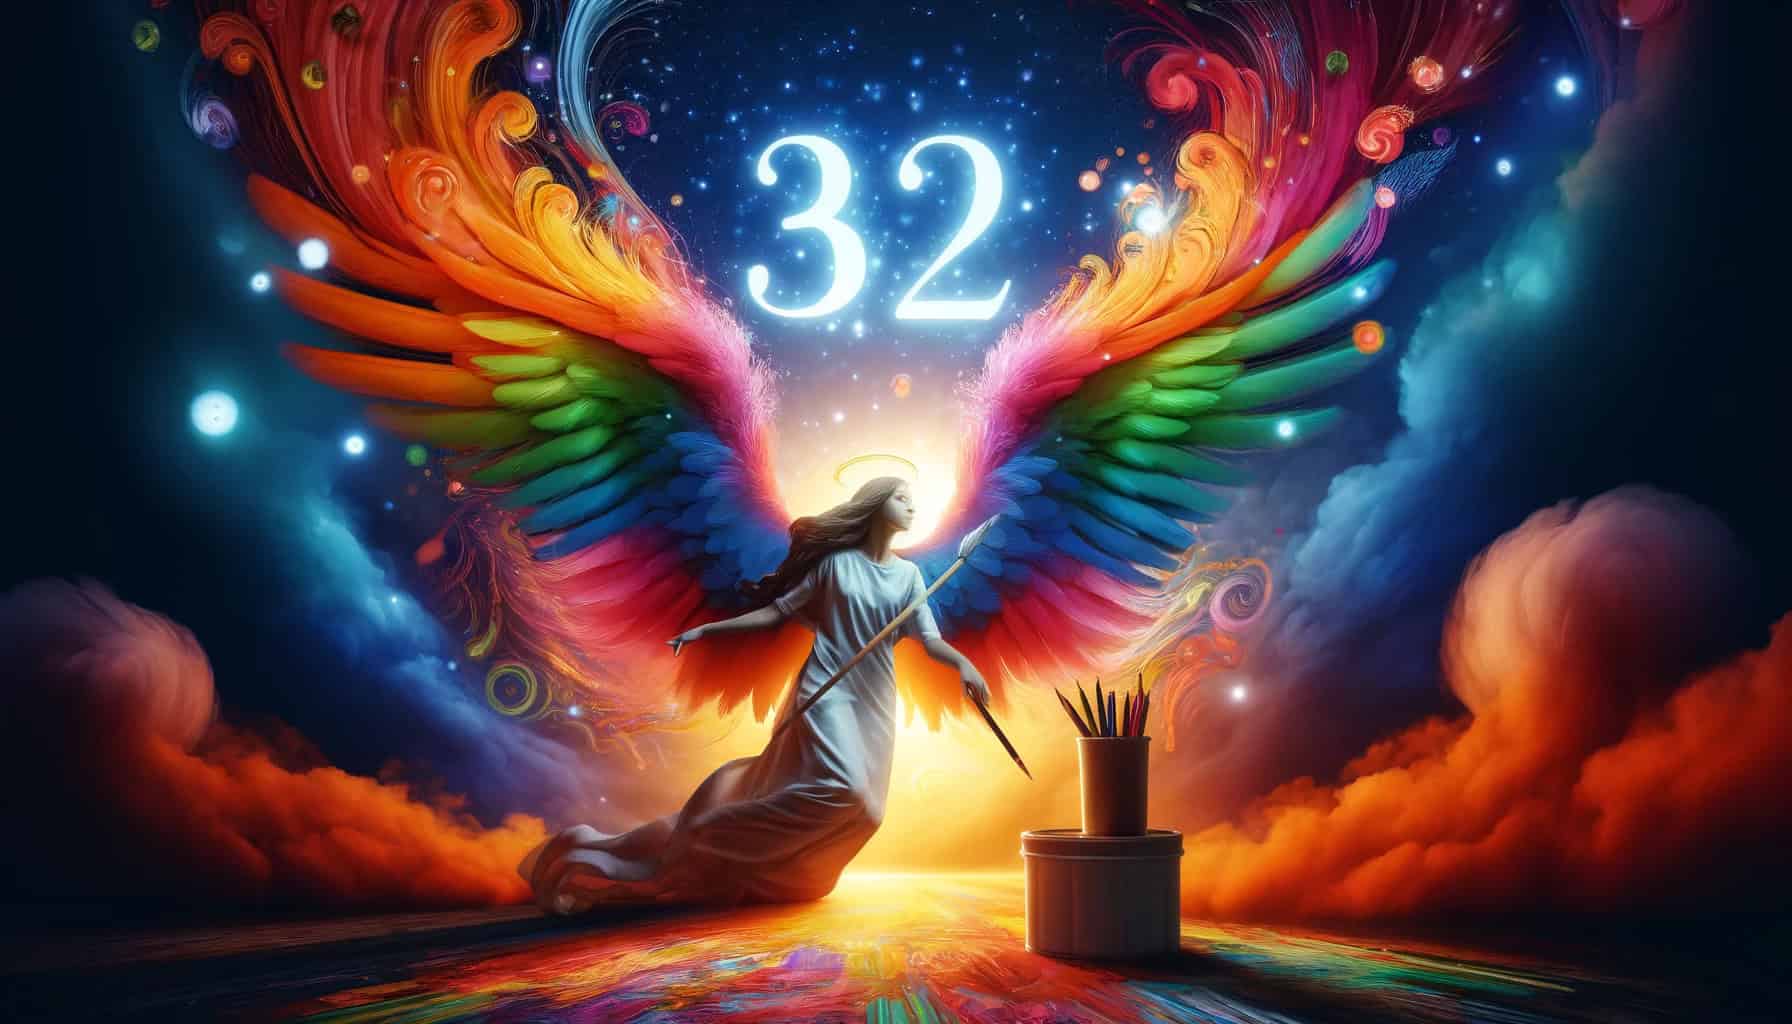 32 angel number featured image